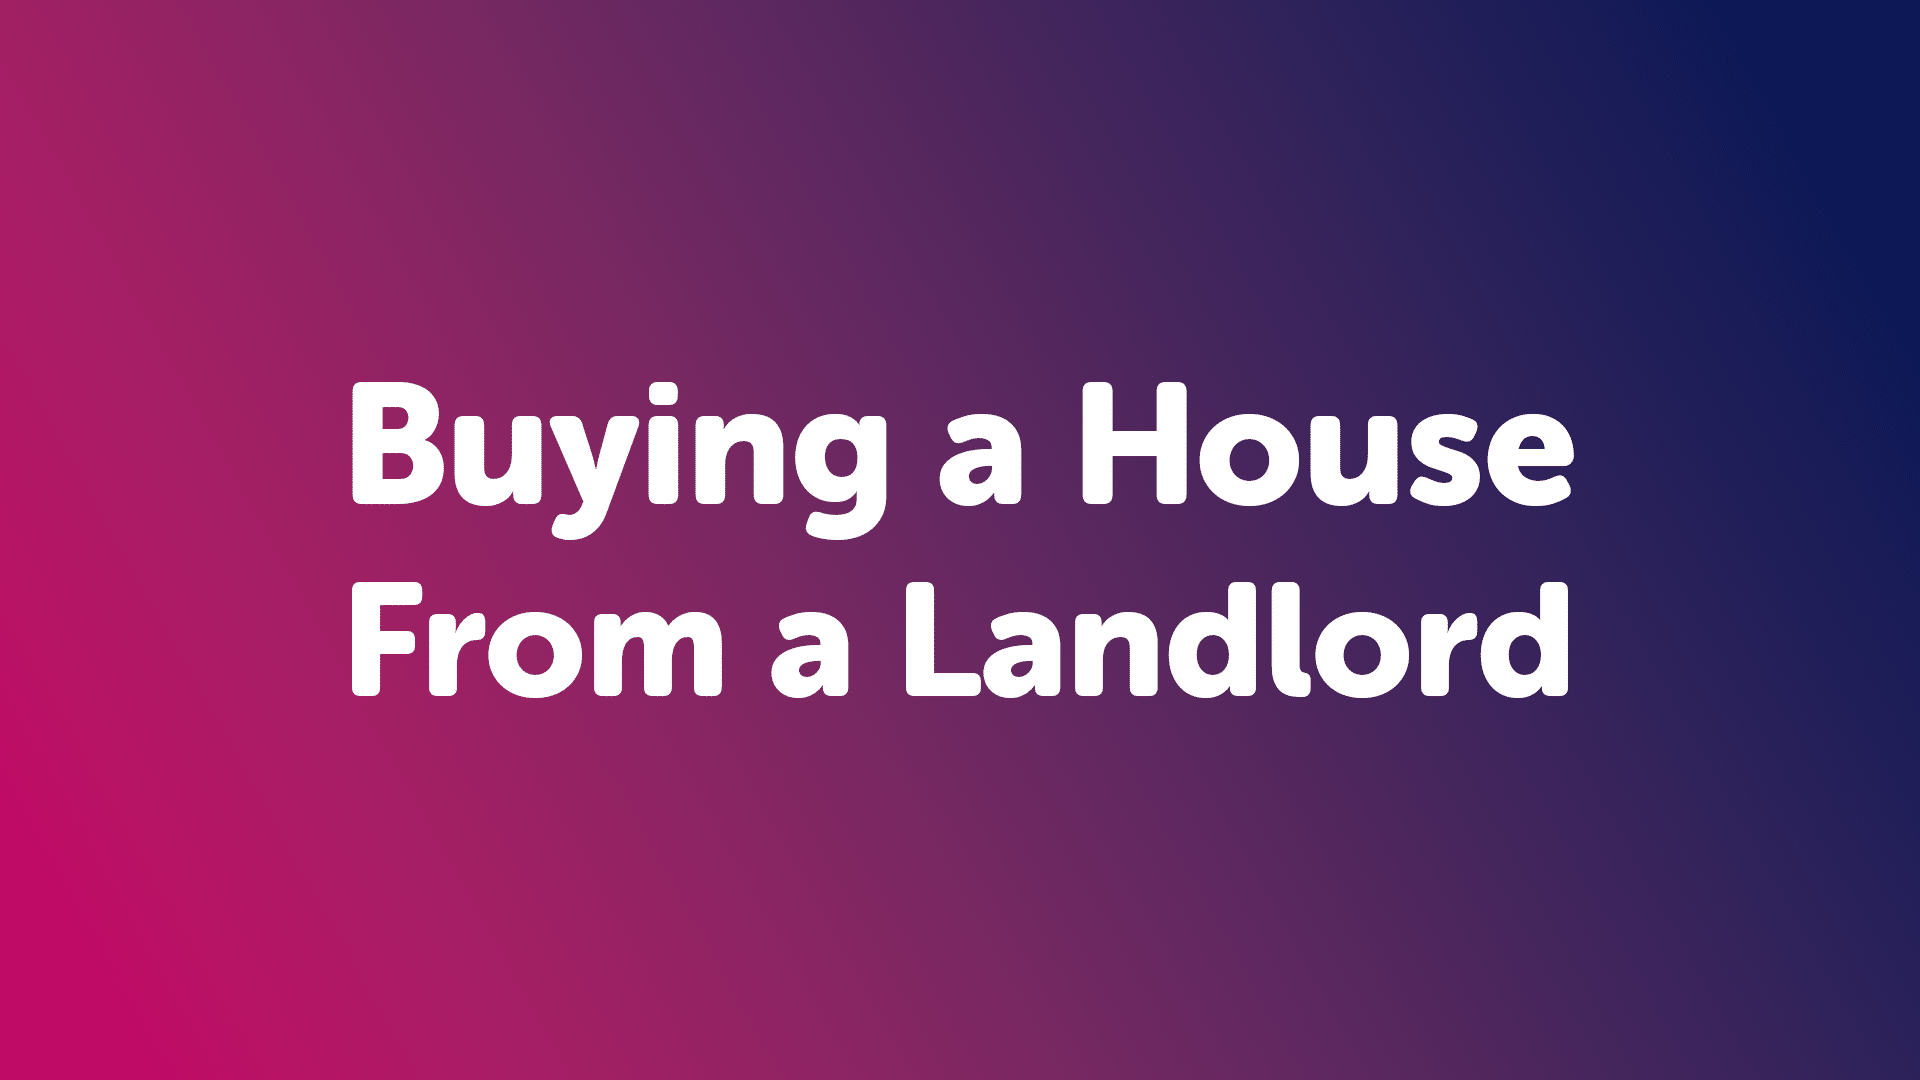 Buying a House From a Landlord in Manchester